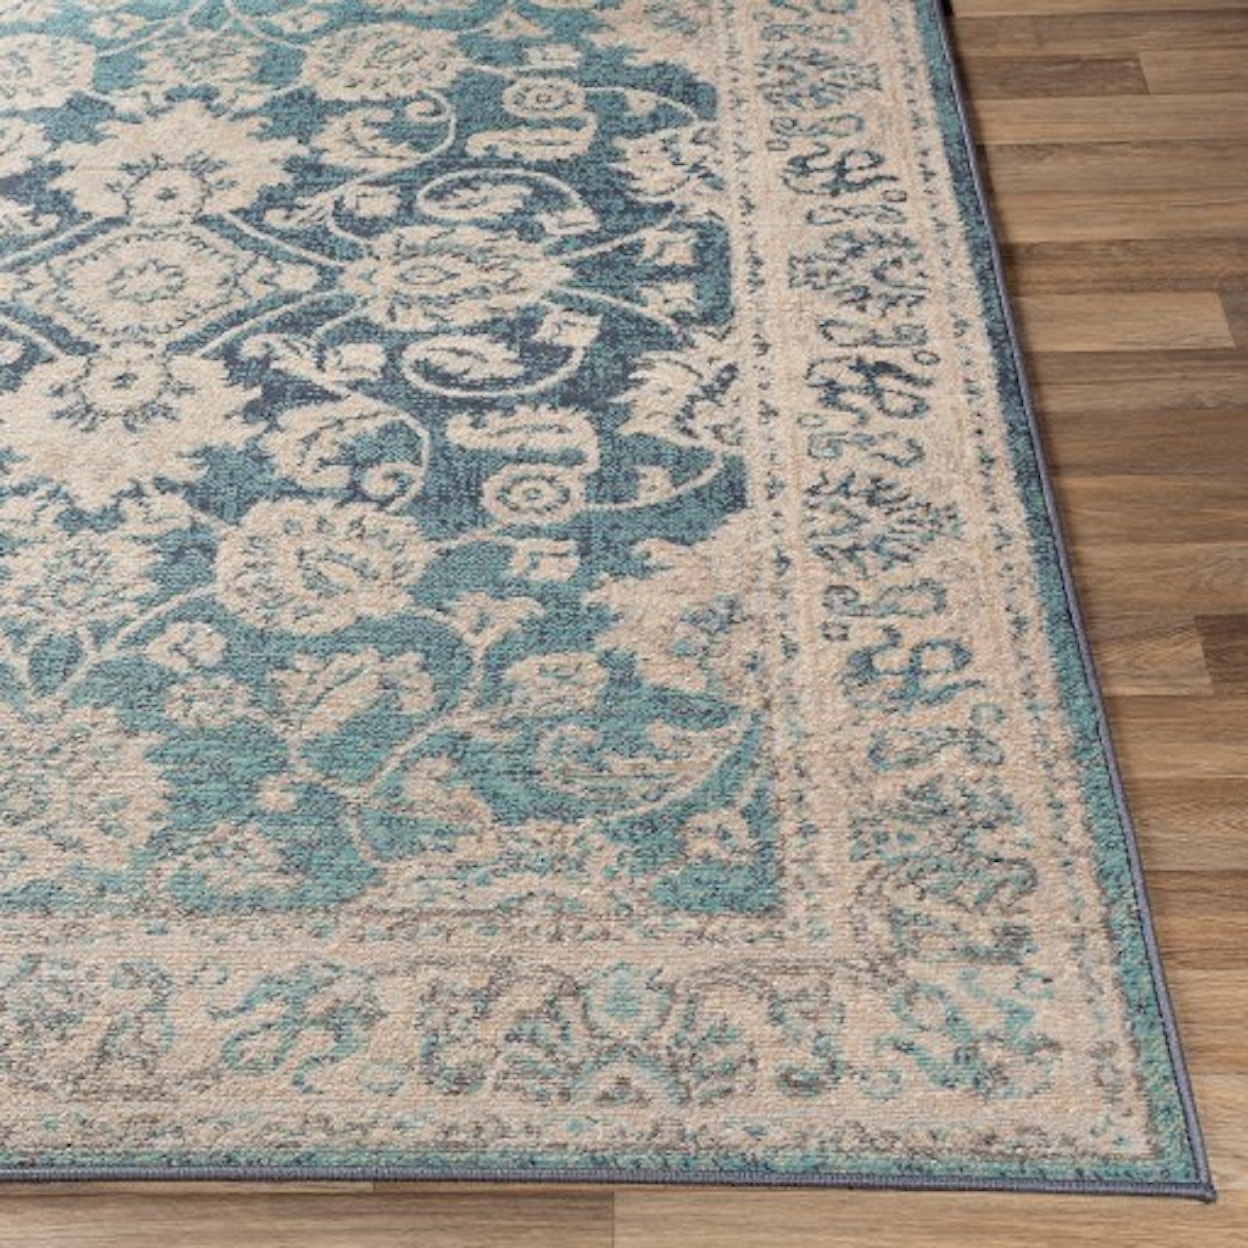 Ruby-Gordon Accents Claire 6'7" x 9' Rug